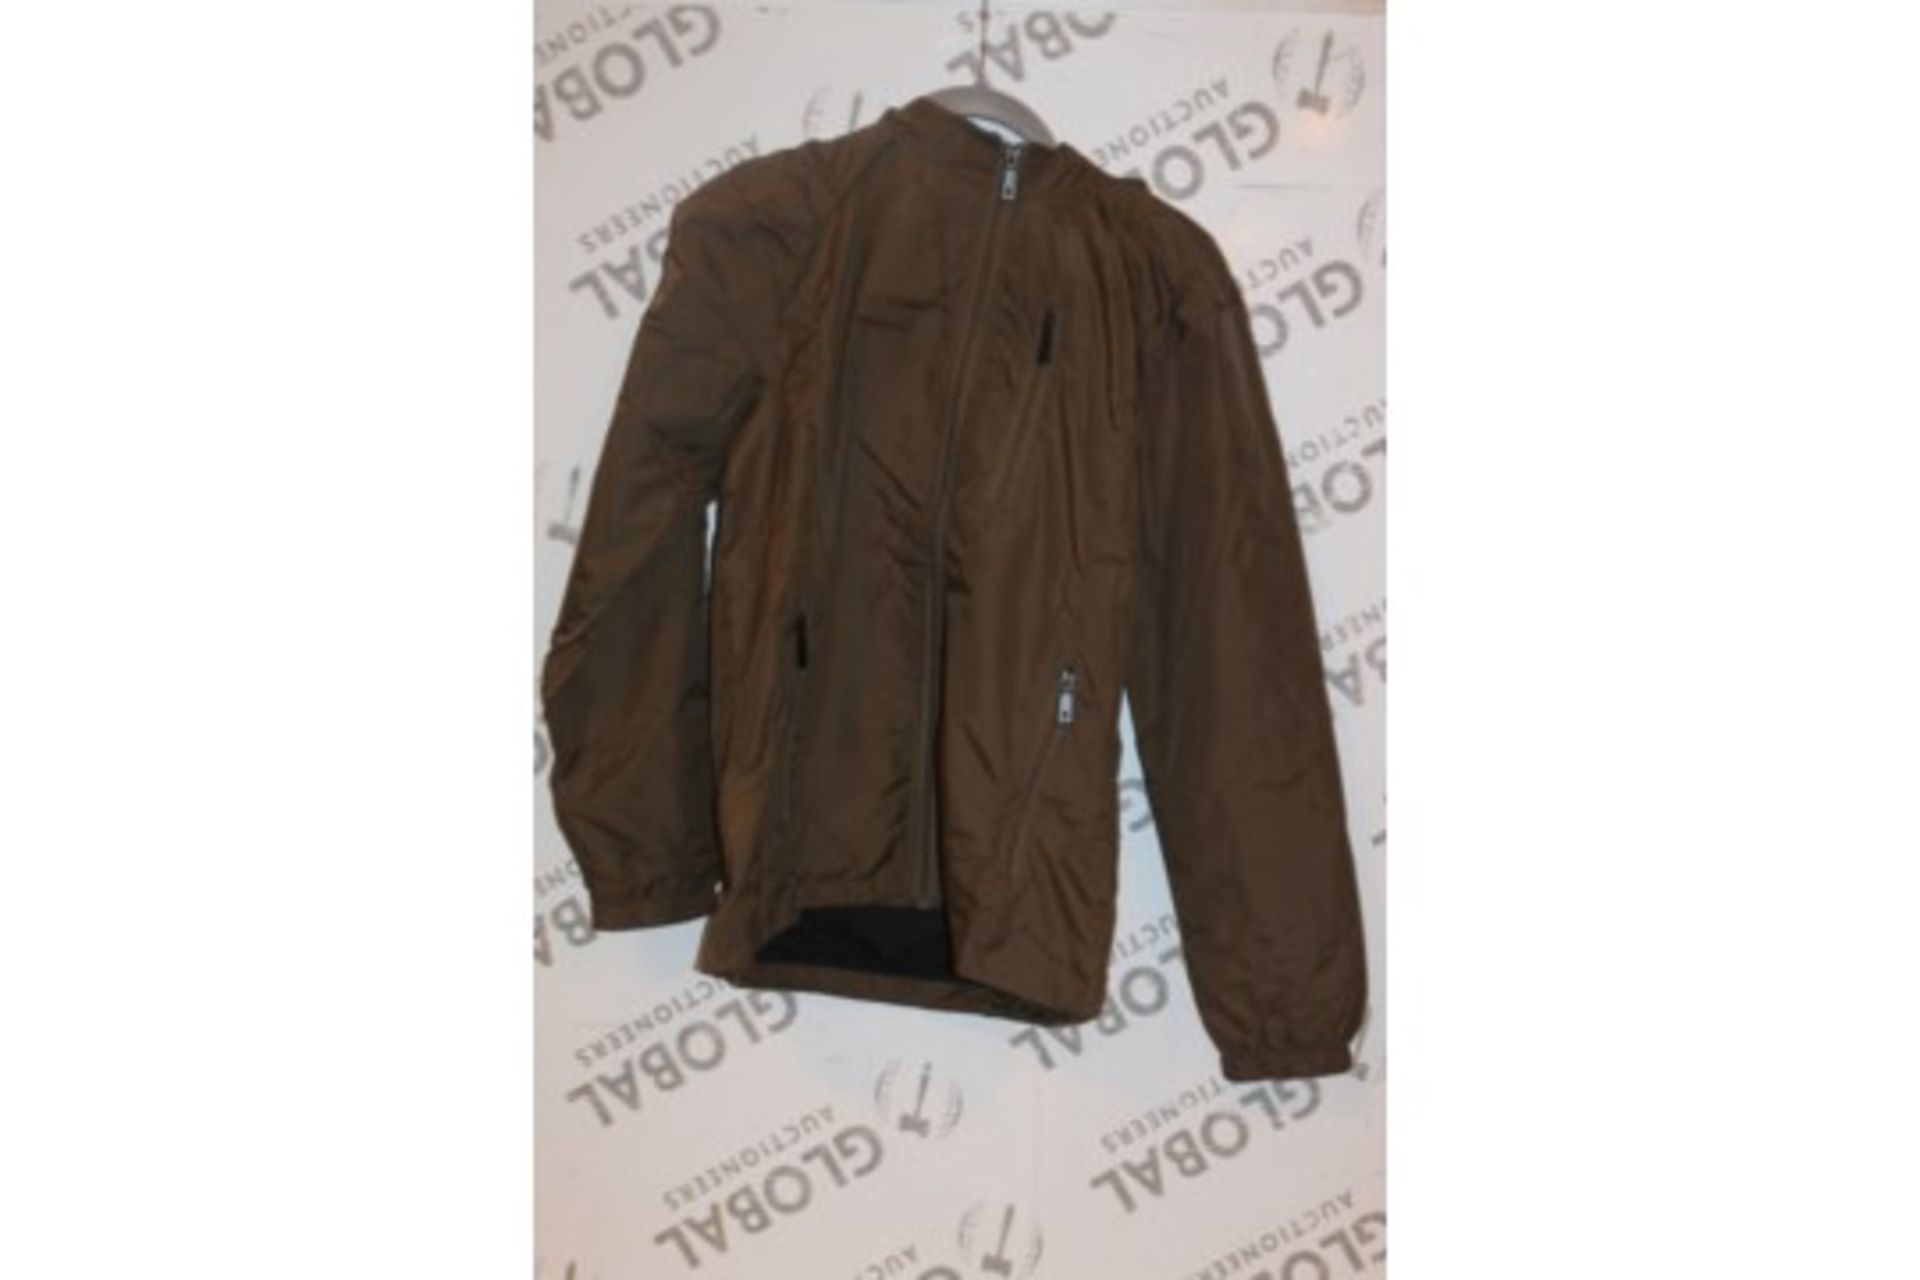 Lot To Contain 10 Assorted Coats & Jackets To Include Light Weight Rain Jackets & Winter Coats for